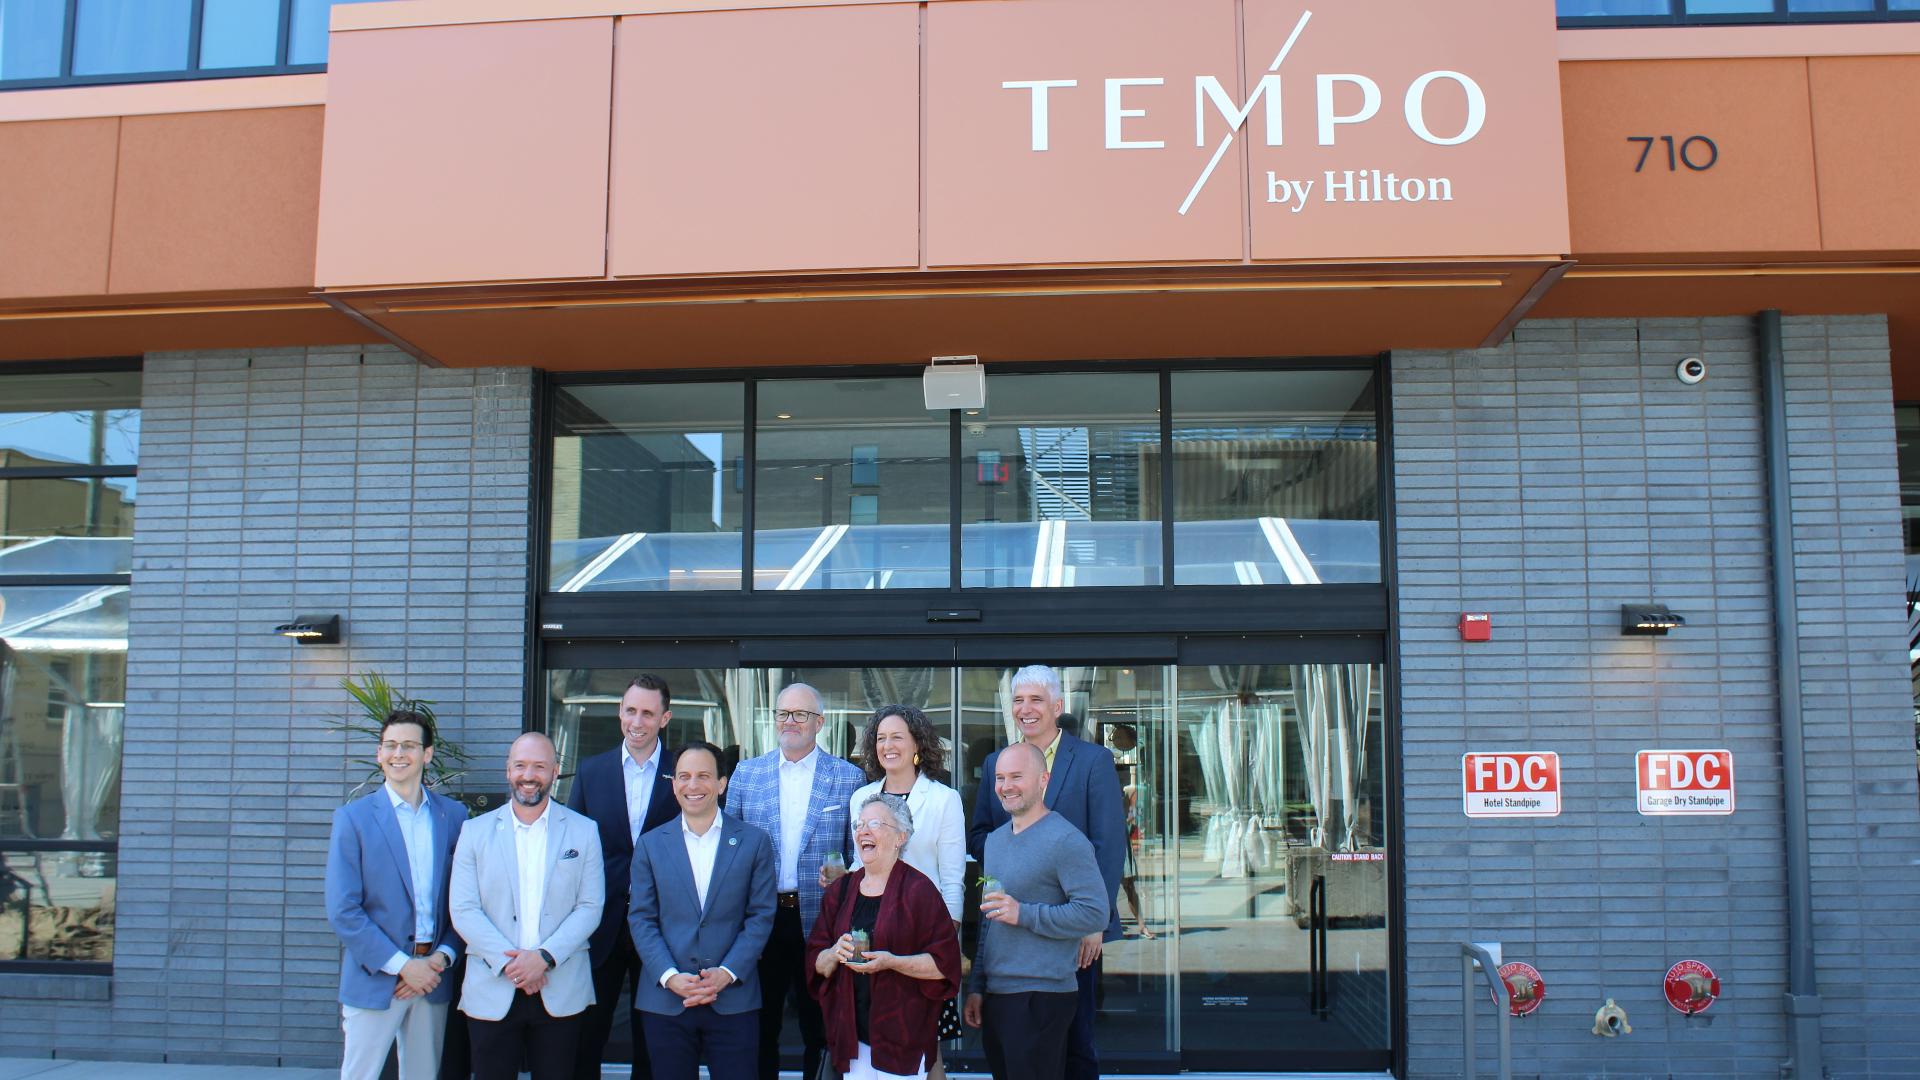 'Tempo' by Hilton is on East Jefferson Street and has 130 rooms, a private dining and event space, five exercise and wellness rooms, a cafe and a rooftop restaurant.